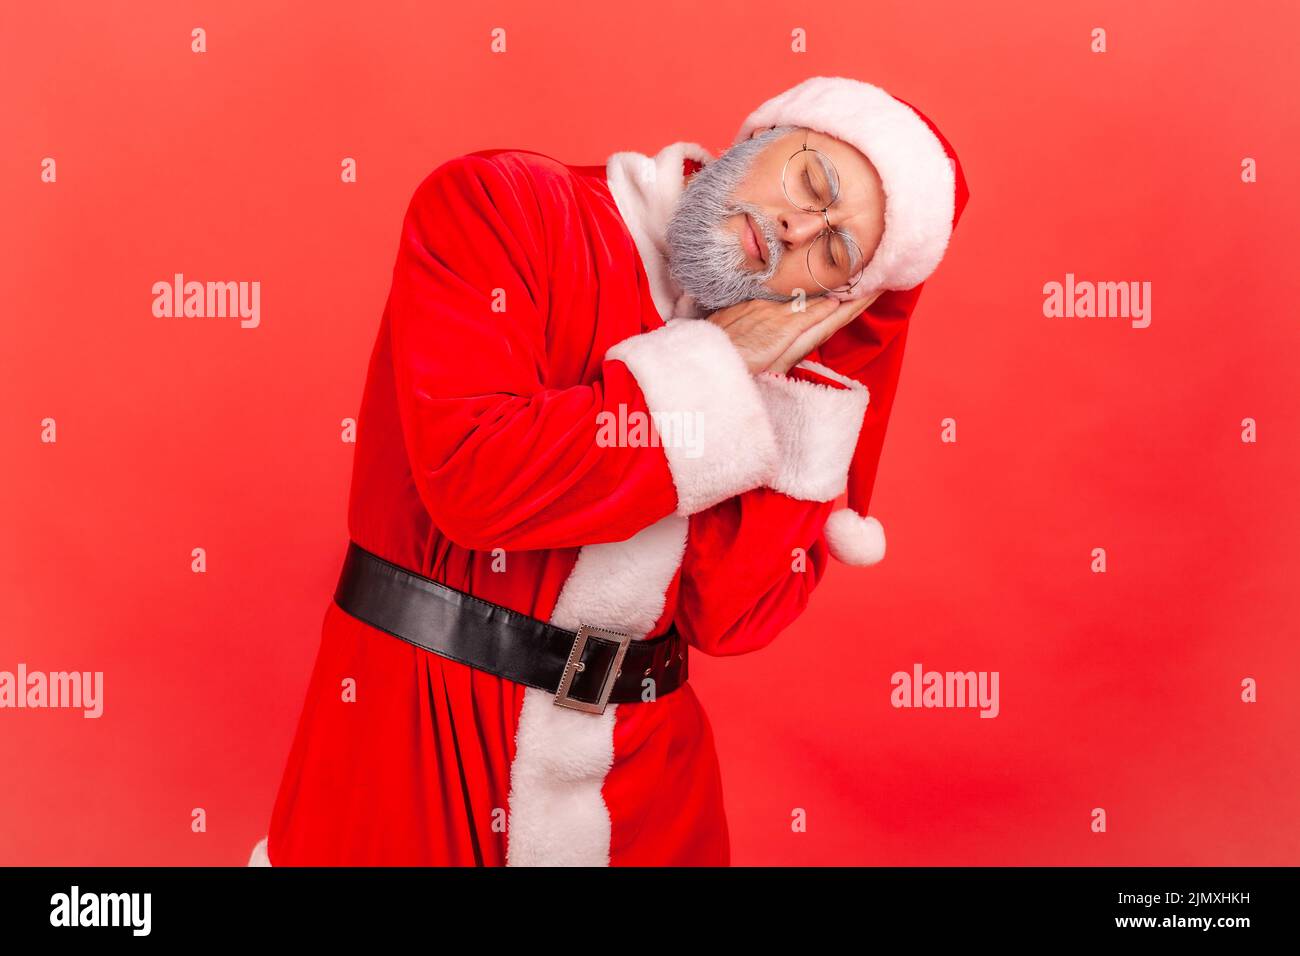 Elderly man wearing santa claus costume sleeping laying down on her palms and smiling pleased, having comfortable nap and resting, dozing off. Indoor studio shot isolated on red background. Stock Photo